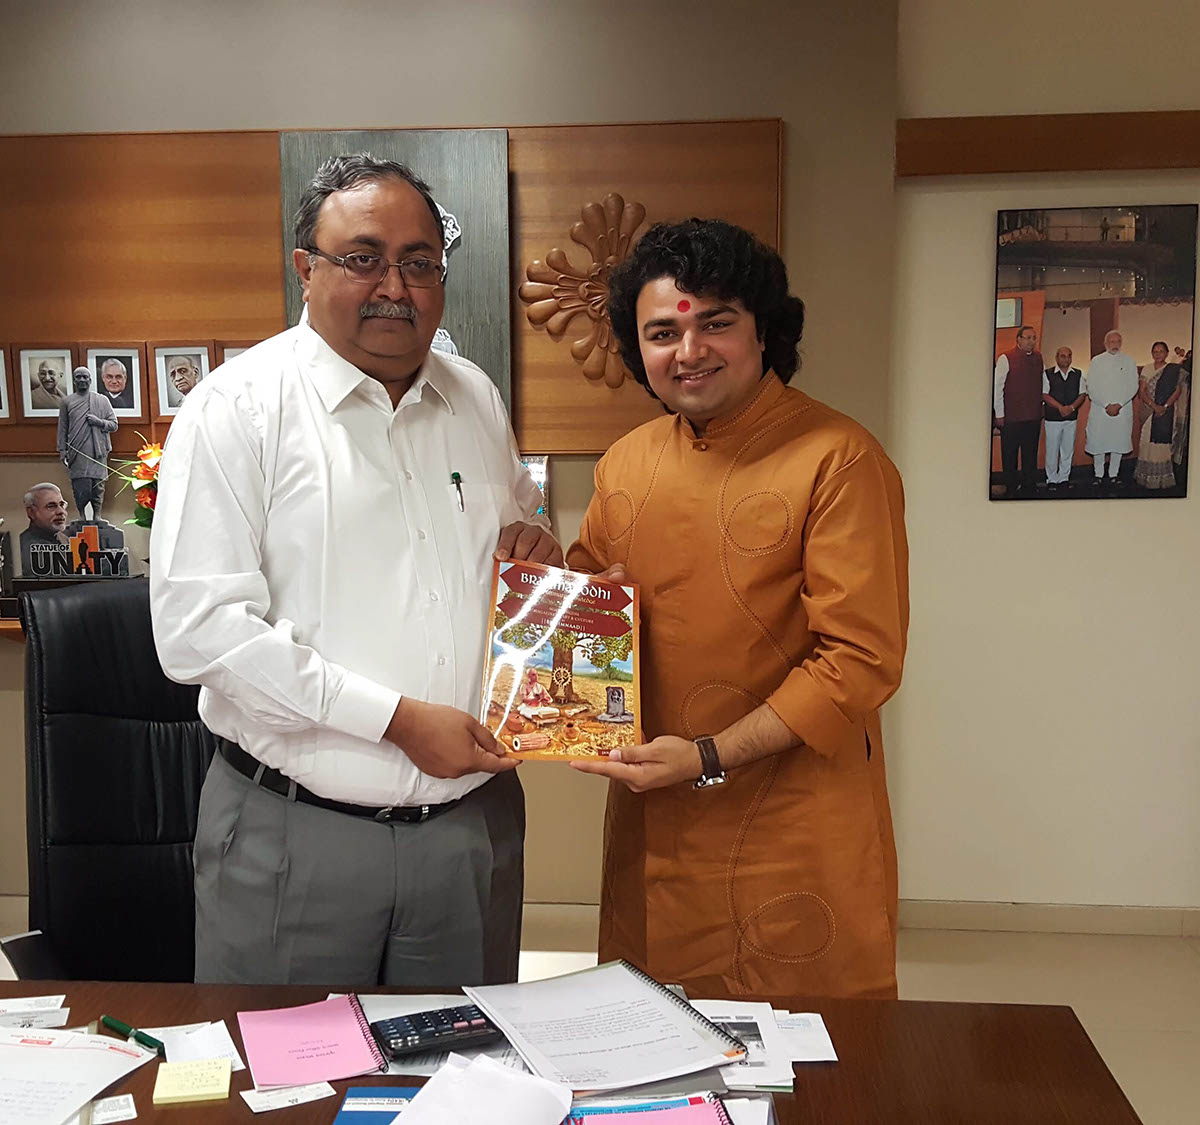 Promotion by Guj. Minister Saurabh Patel